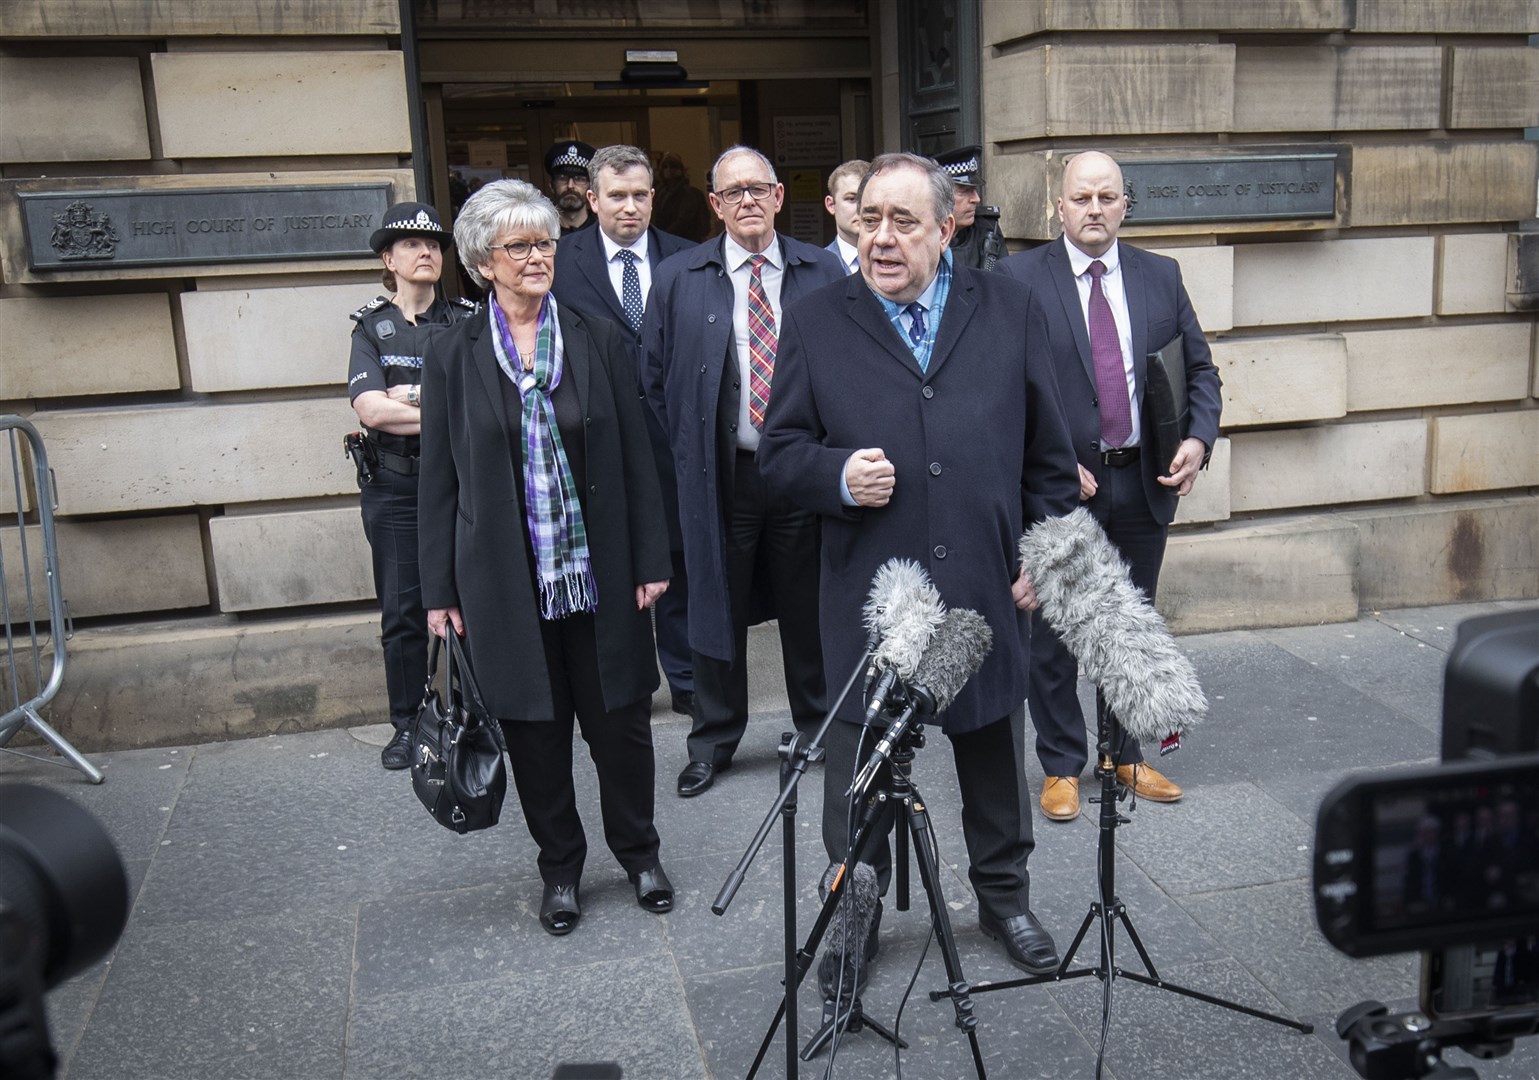 Alex Salmond was on trial at the High Court in Edinburgh last spring (Jane Barlow/PA)